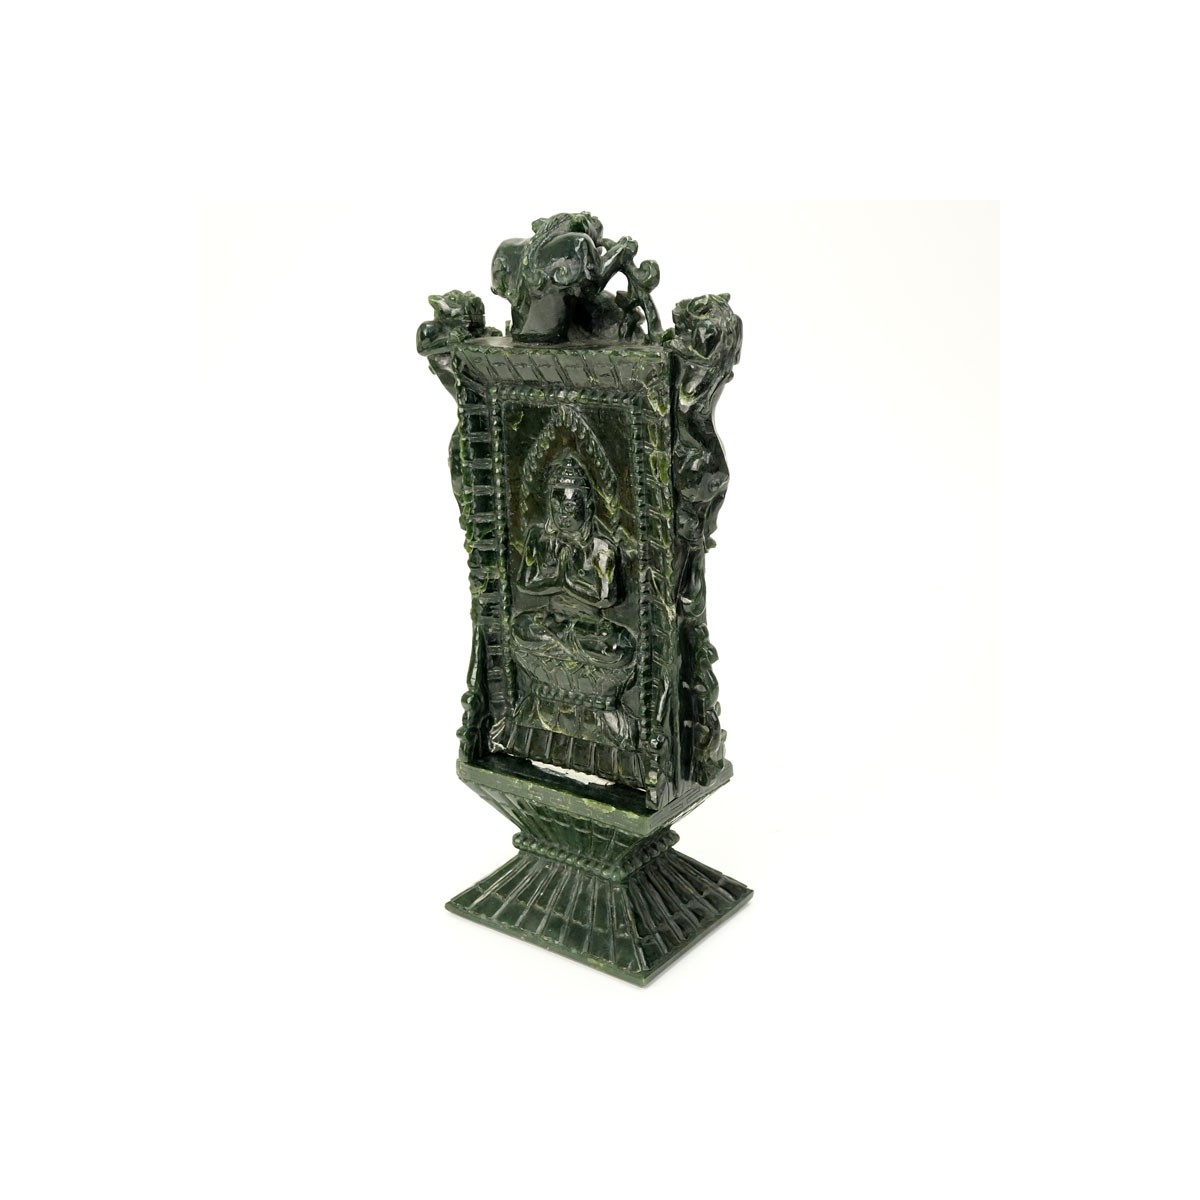 Early 20th Century Chinese Carved Dark Green Jade Ceremonial Plaque. Seated Buddha motif on front a